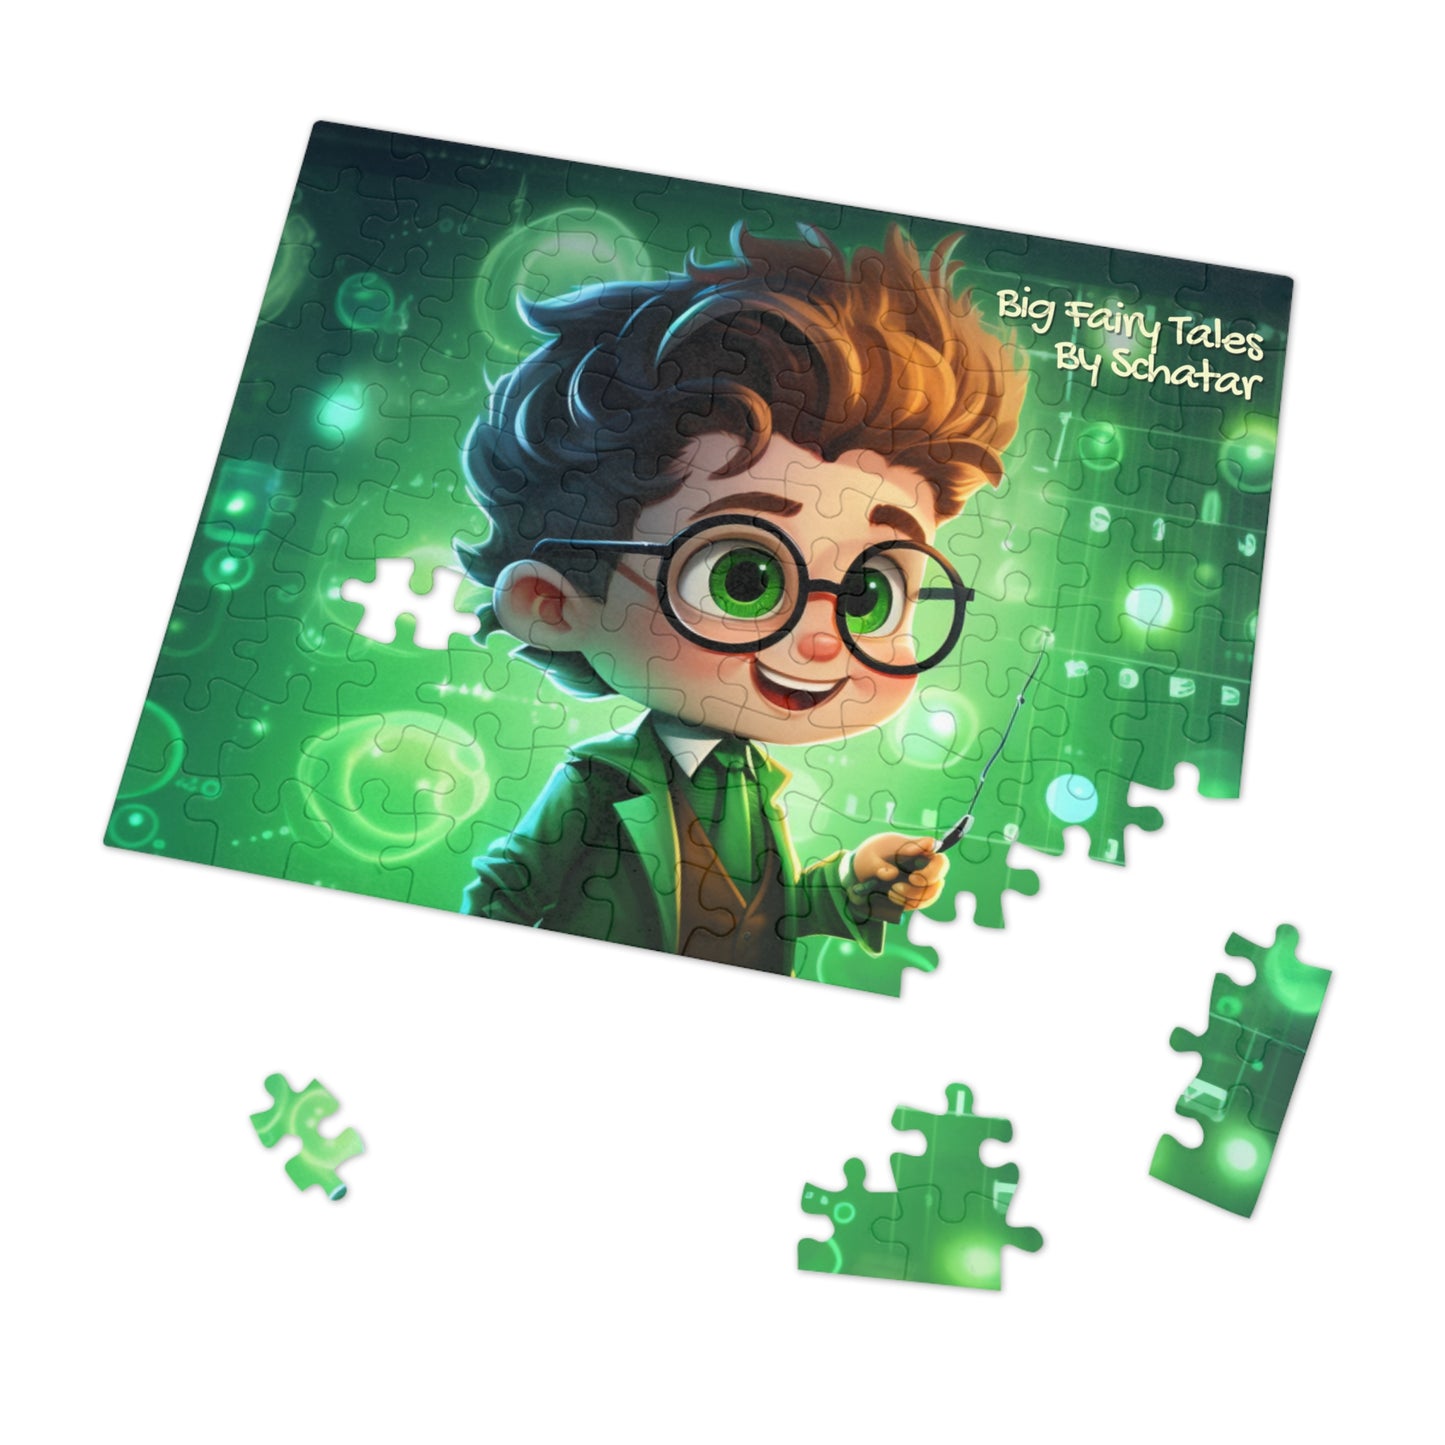 Professor - Big Little Professionals Puzzle 11 From Big Fairy Tales By Schatar